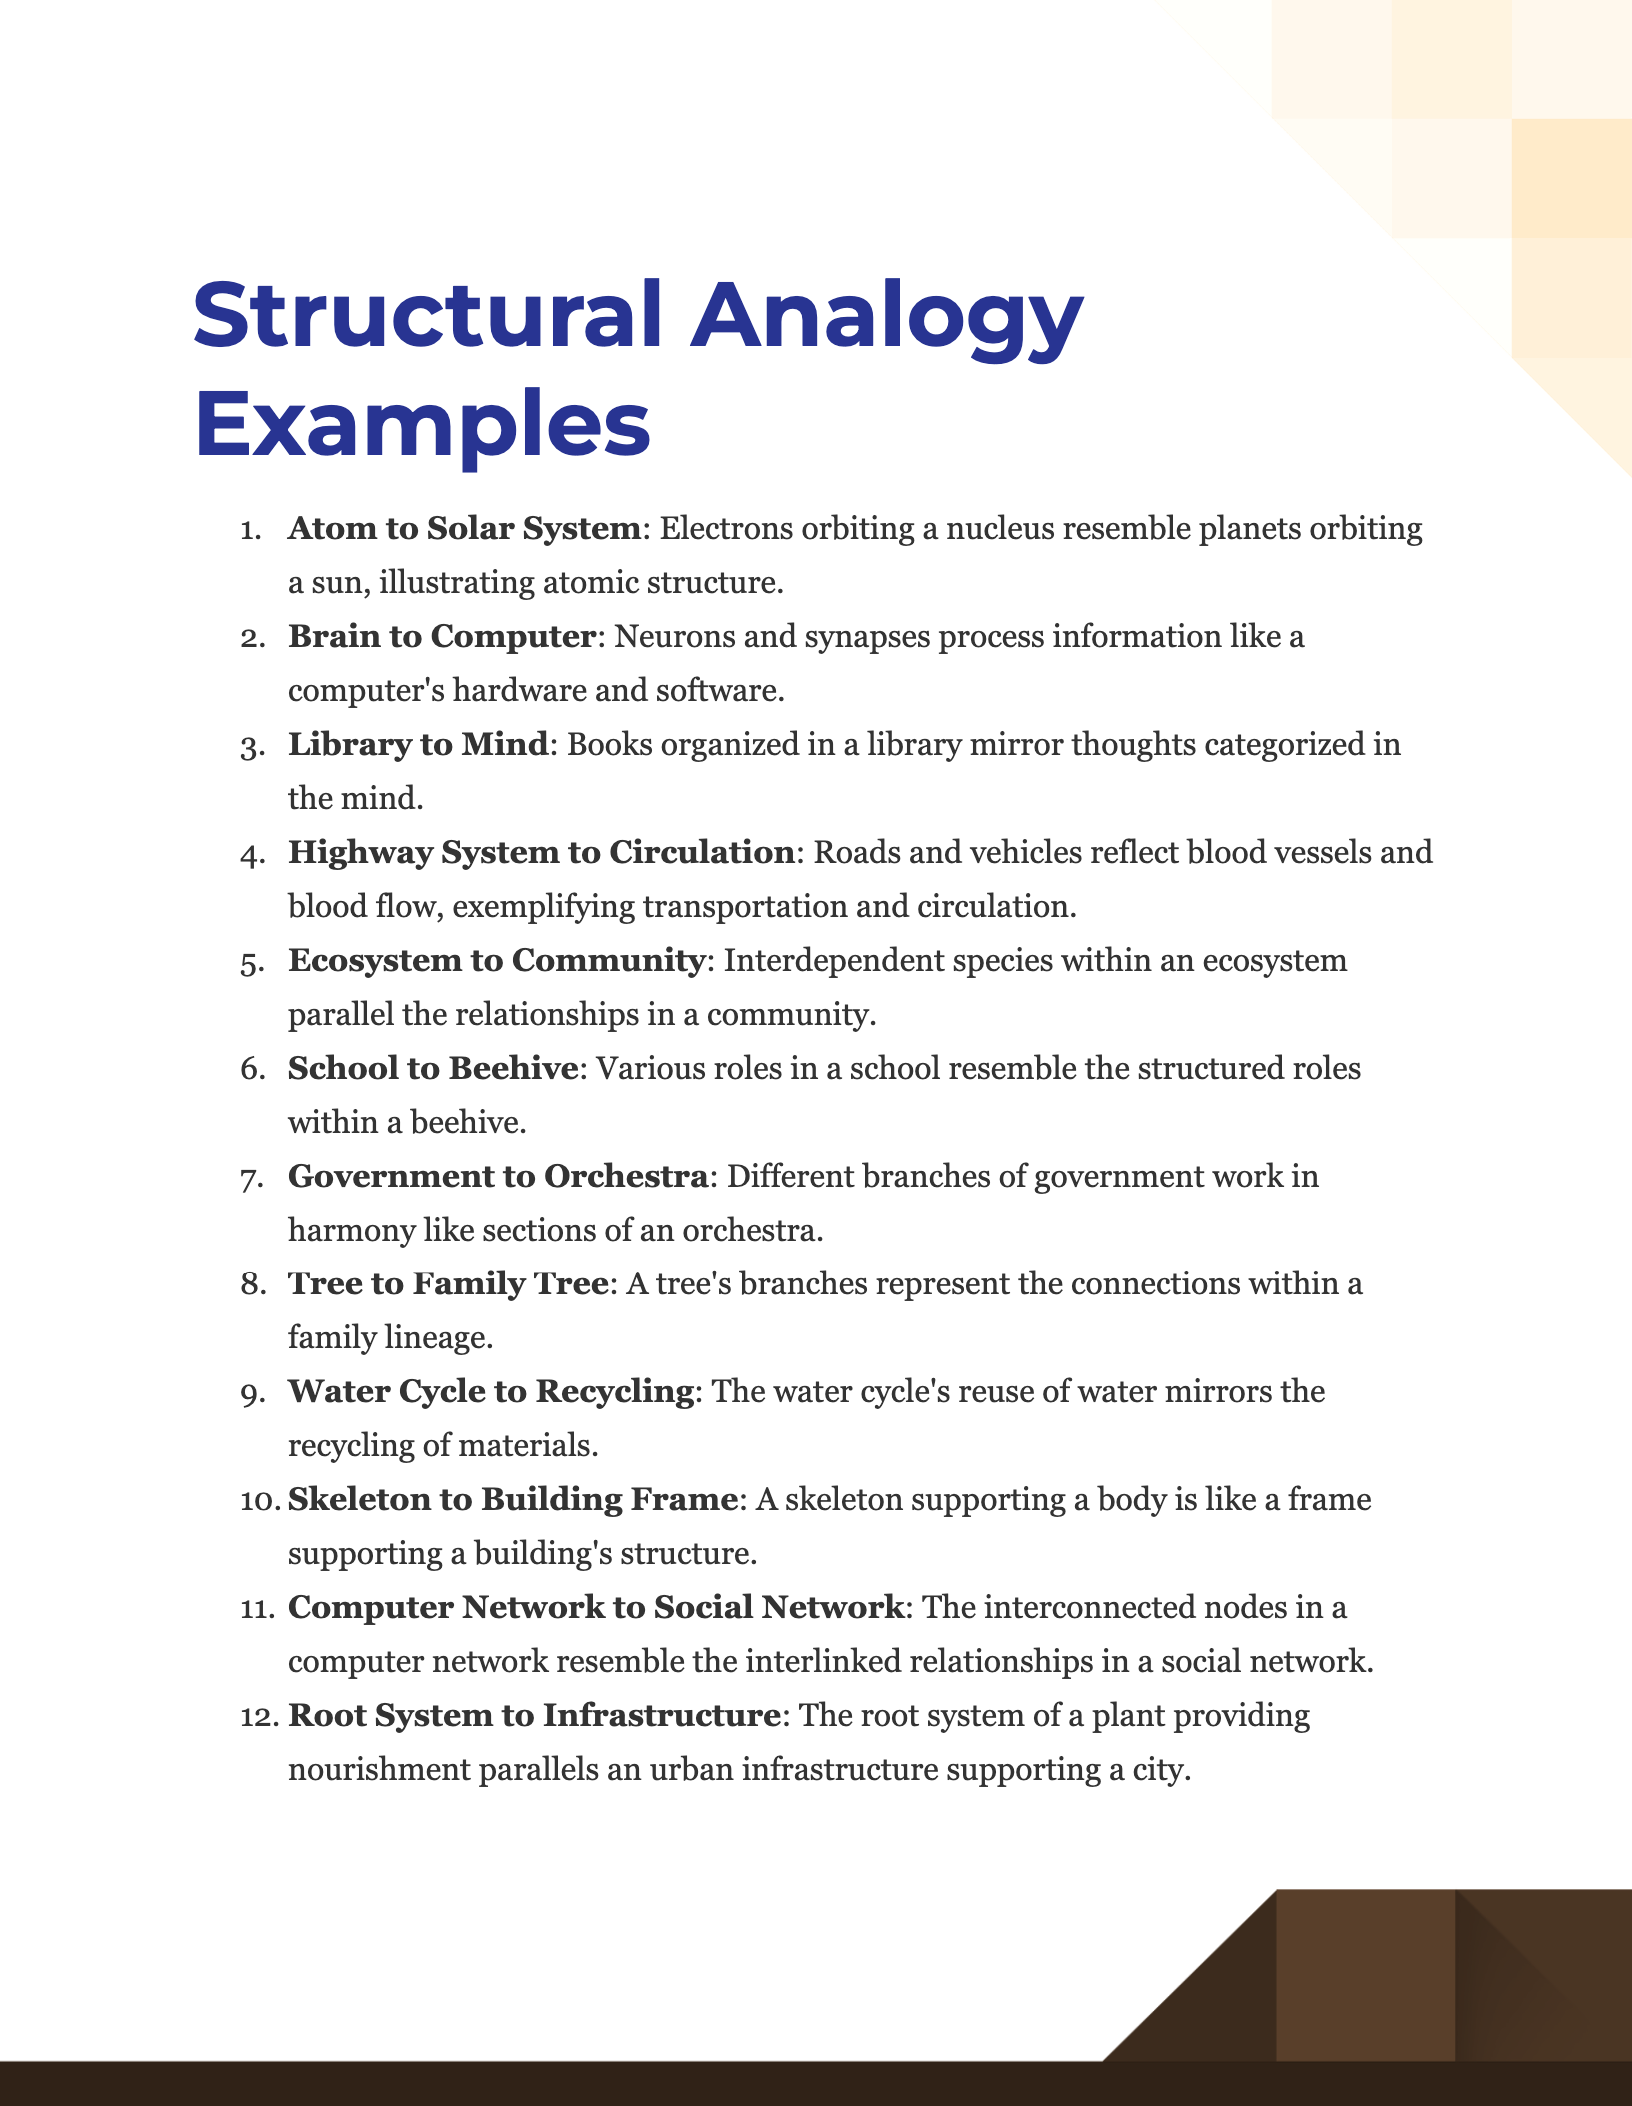 Structural Analogy Examples